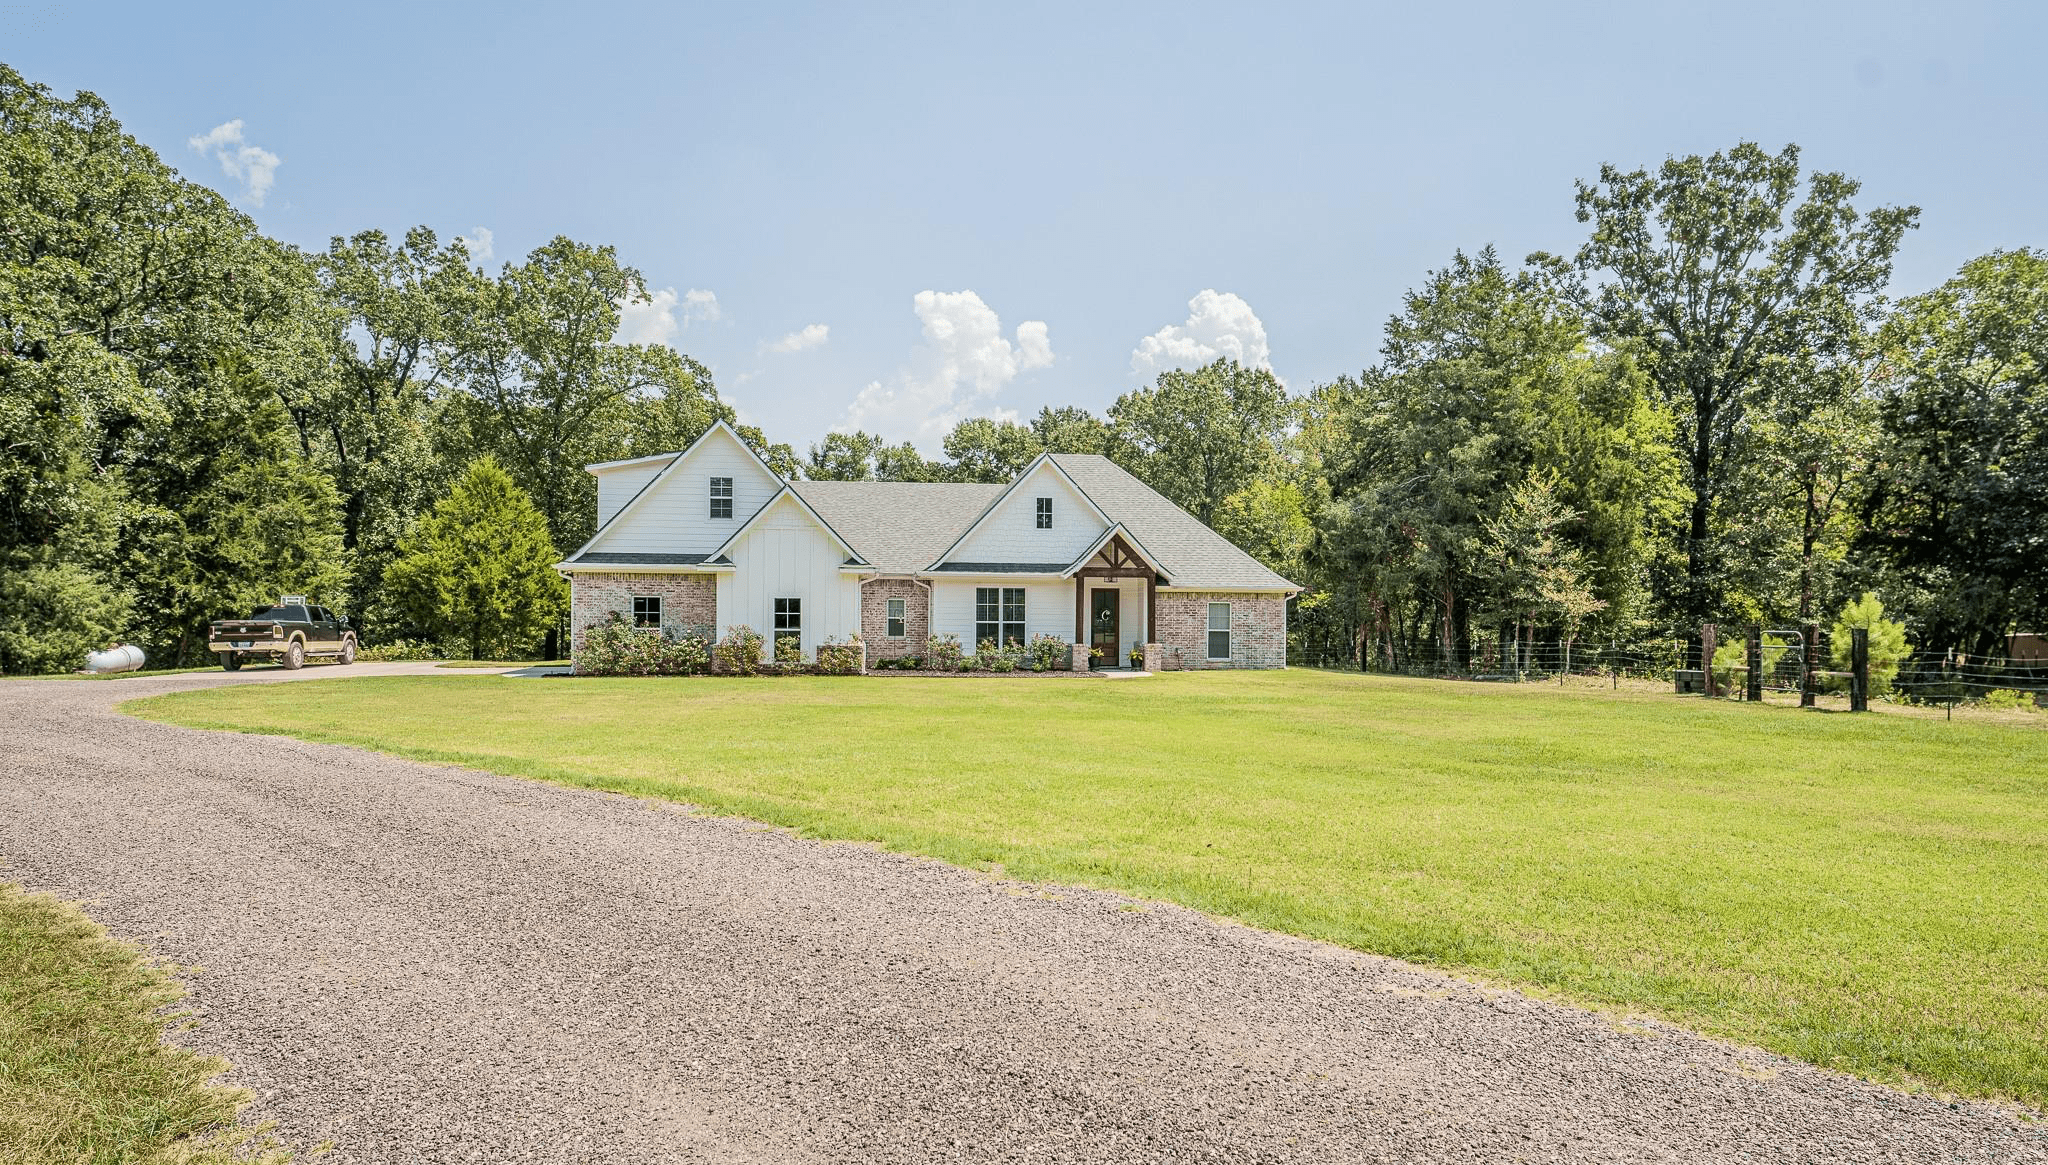 Delightful House Built on Partly Wooded 6.5 Acres South of Sulphur Springs Hits the Market